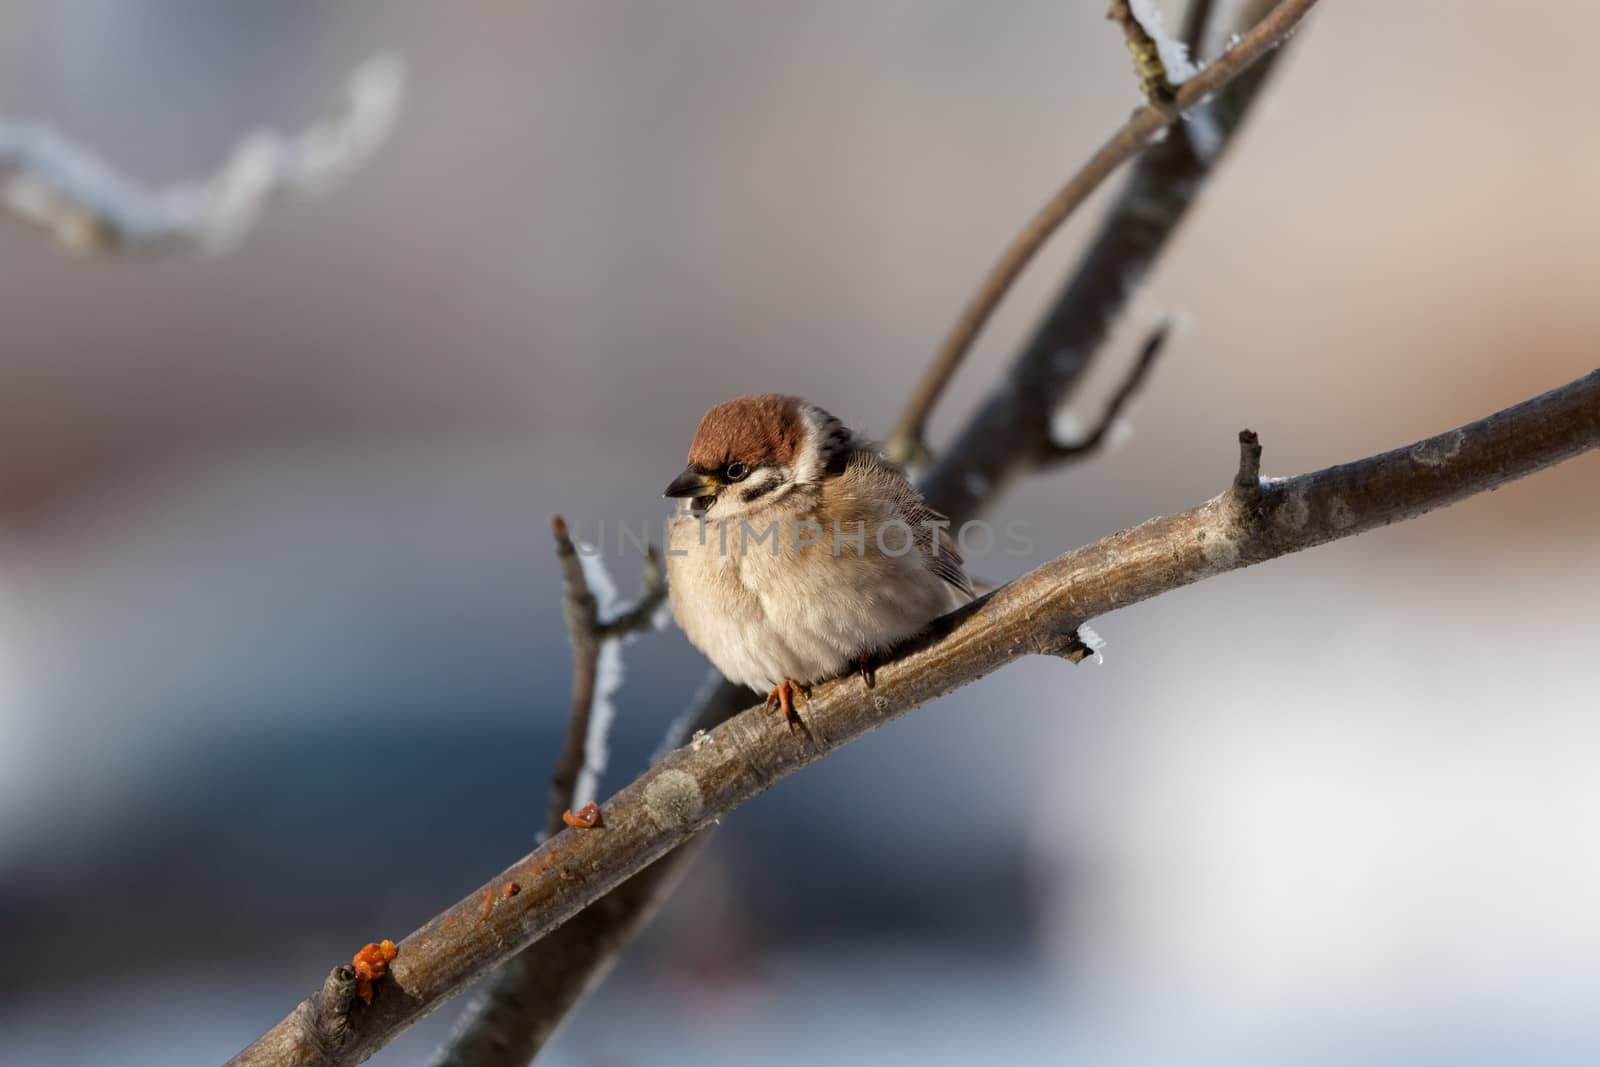 The bird sparrow sits on a mountain ash branch in winter day